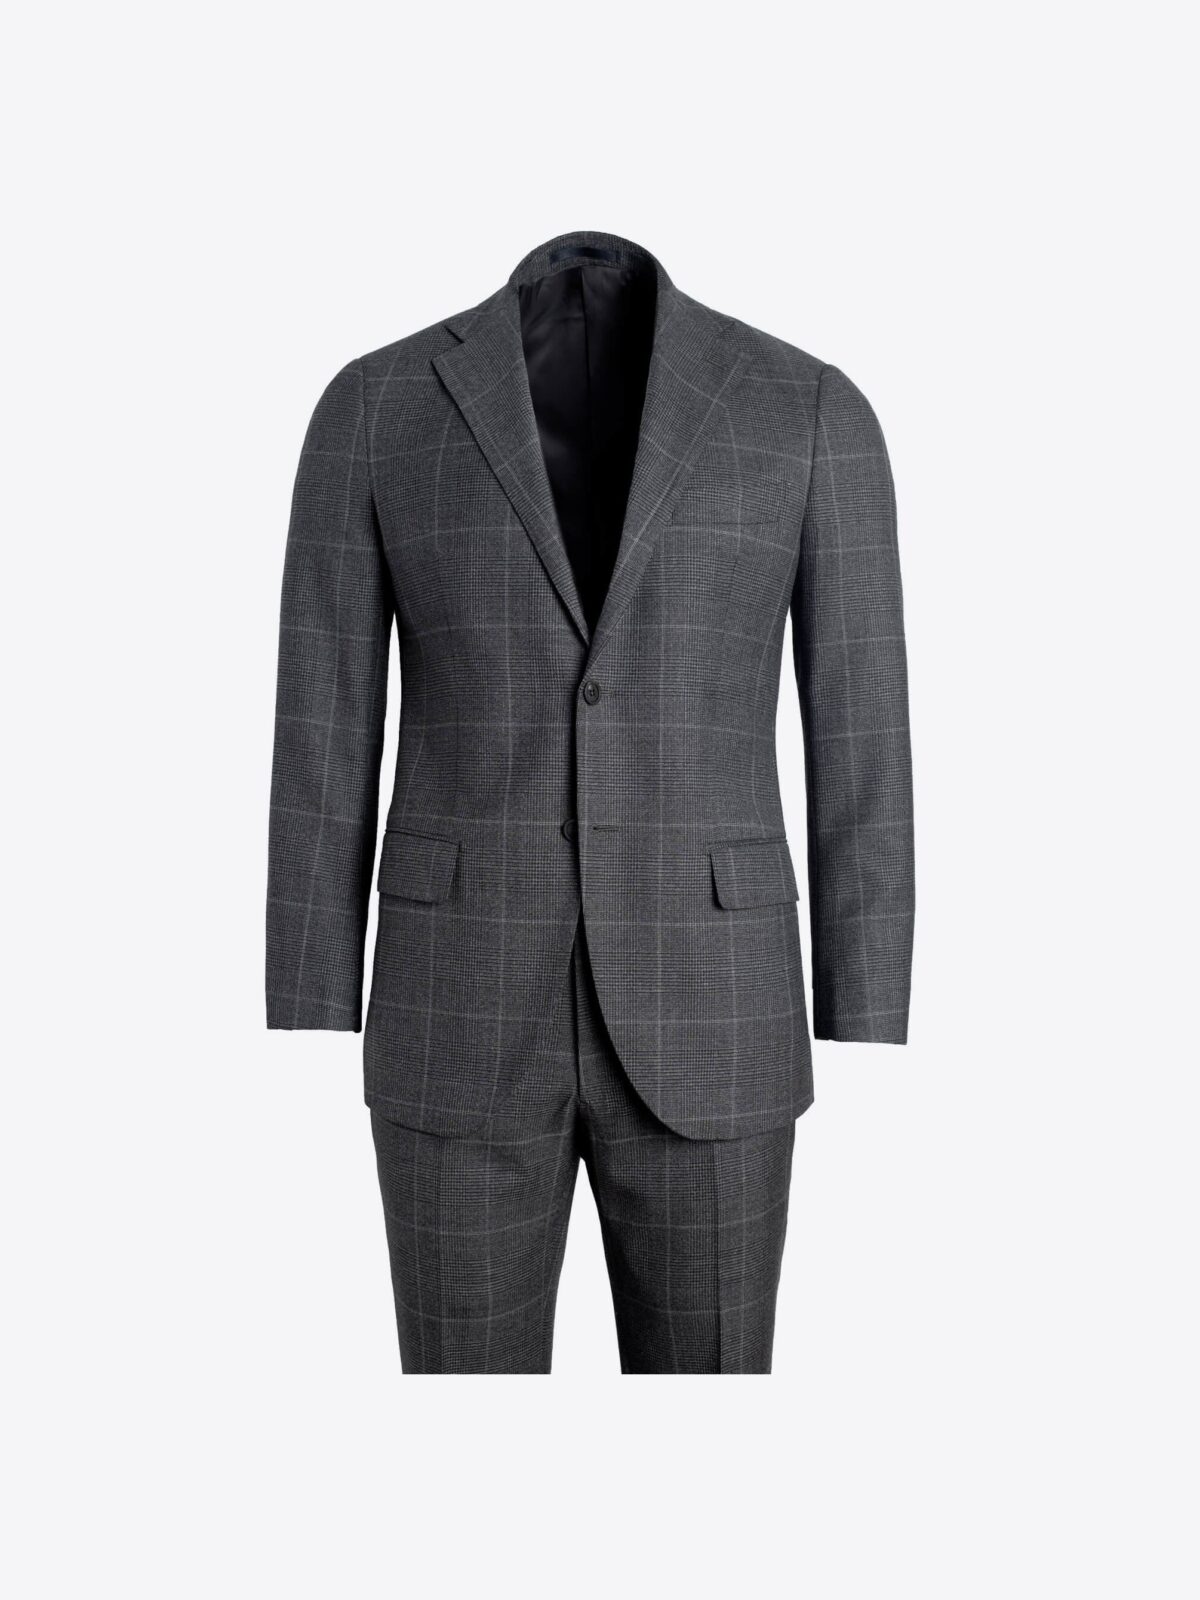 Drago Taupe Tropical Wool S130s Allen Suit - Custom Fit Tailored Clothing